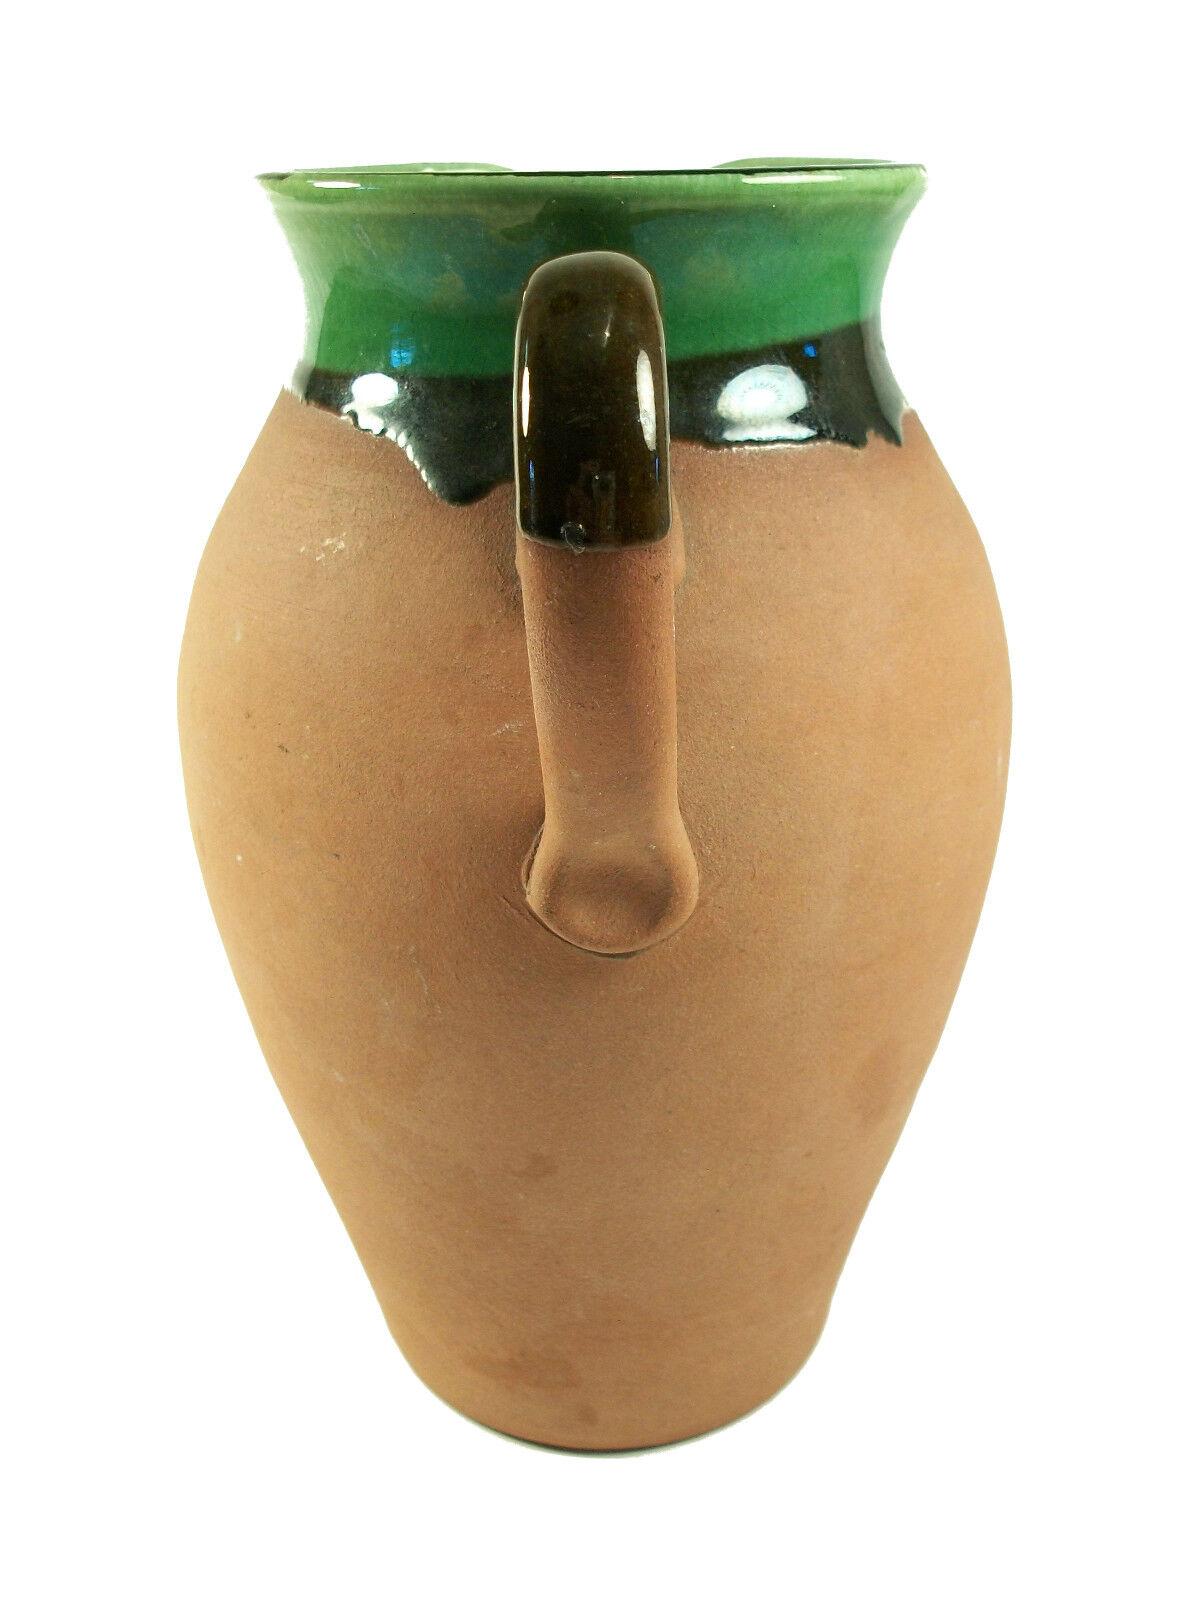 WATCOMBE TORQUAY - Vintage wheel thrown terracotta jug with glazed interior and lip - partially glazed handle - United Kingdom - mid 20th century.

Excellent vintage condition - no loss - no damage - no restoration.

Size - 5 3/4